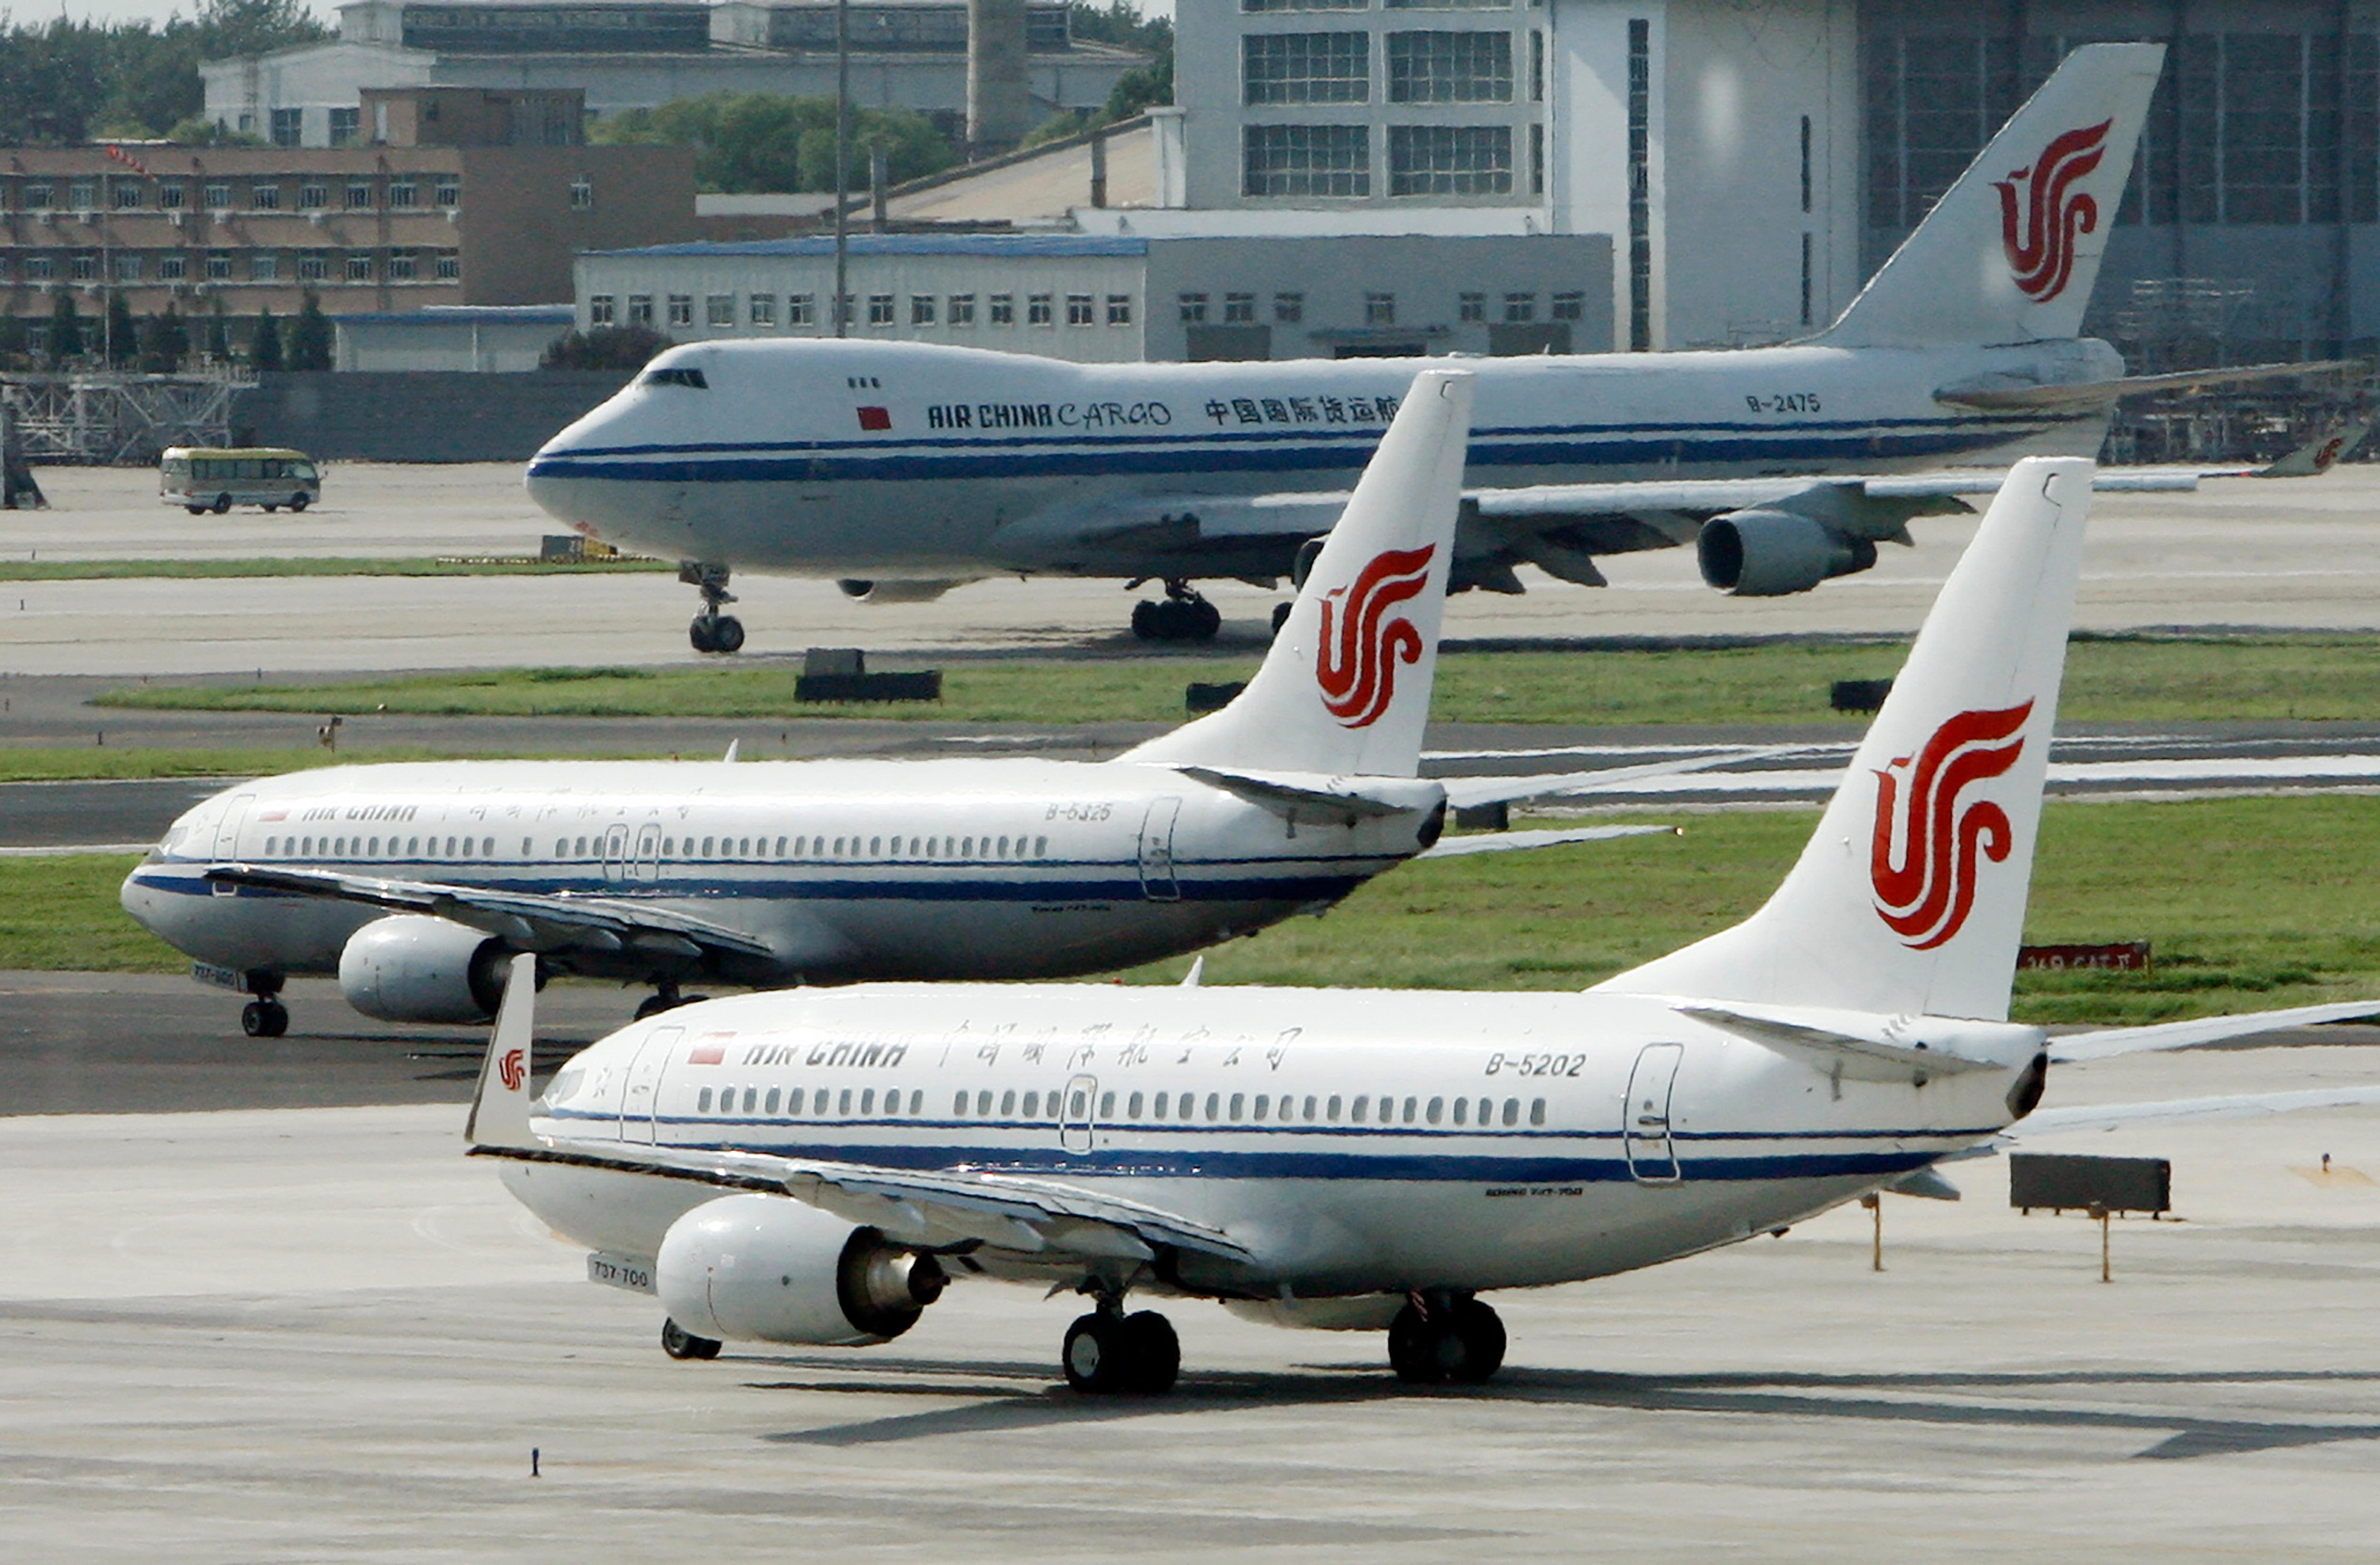 Air China planes sit on the tarmac at Beijing Airport in Beijing, China on Aug. 20, 2009